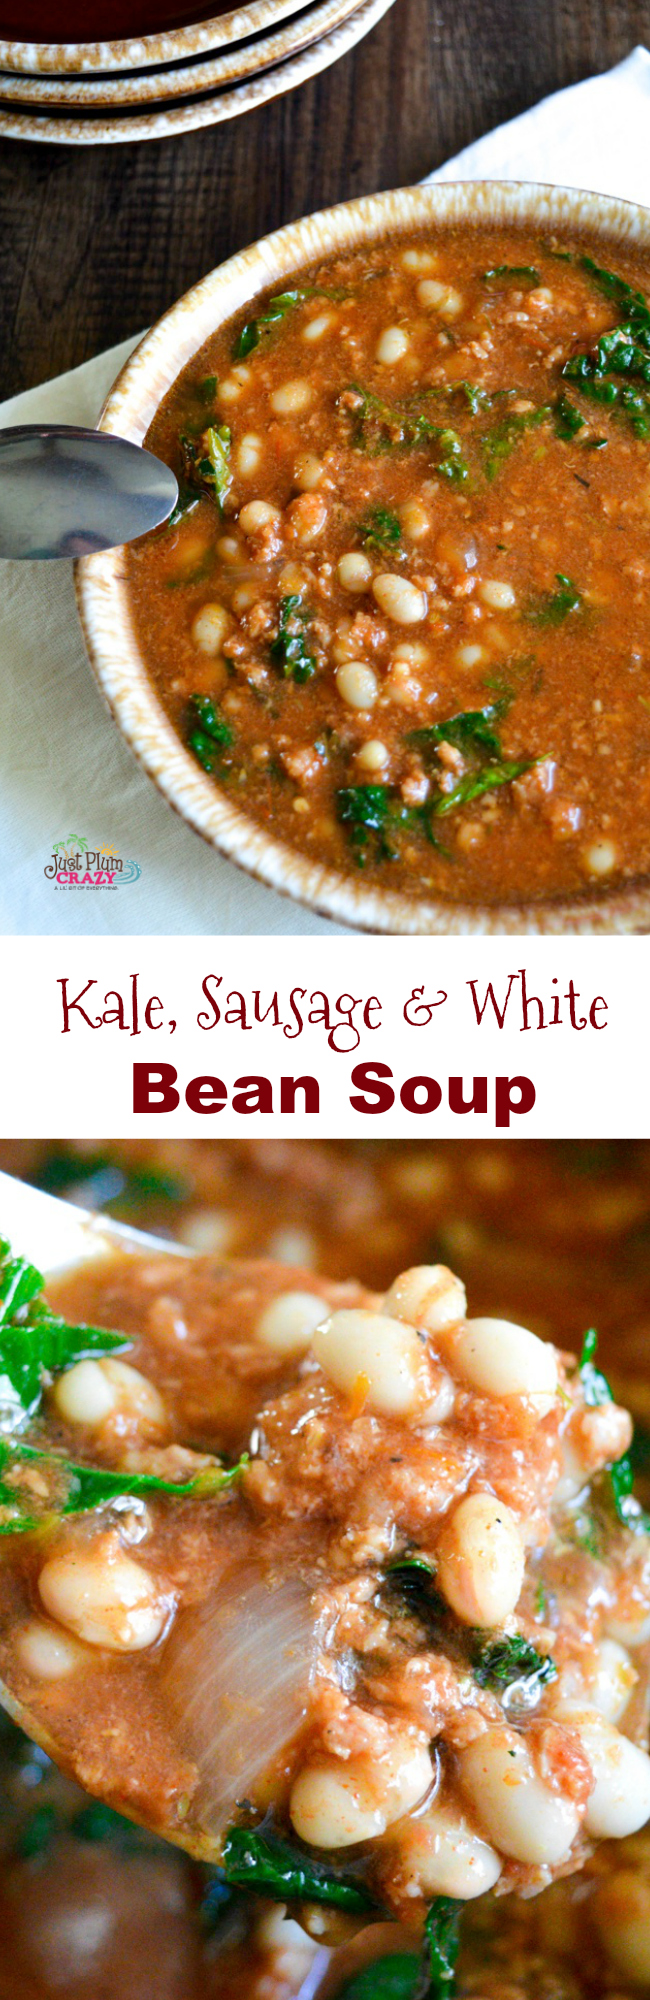 Slow cooker kale and sausage soup recipe